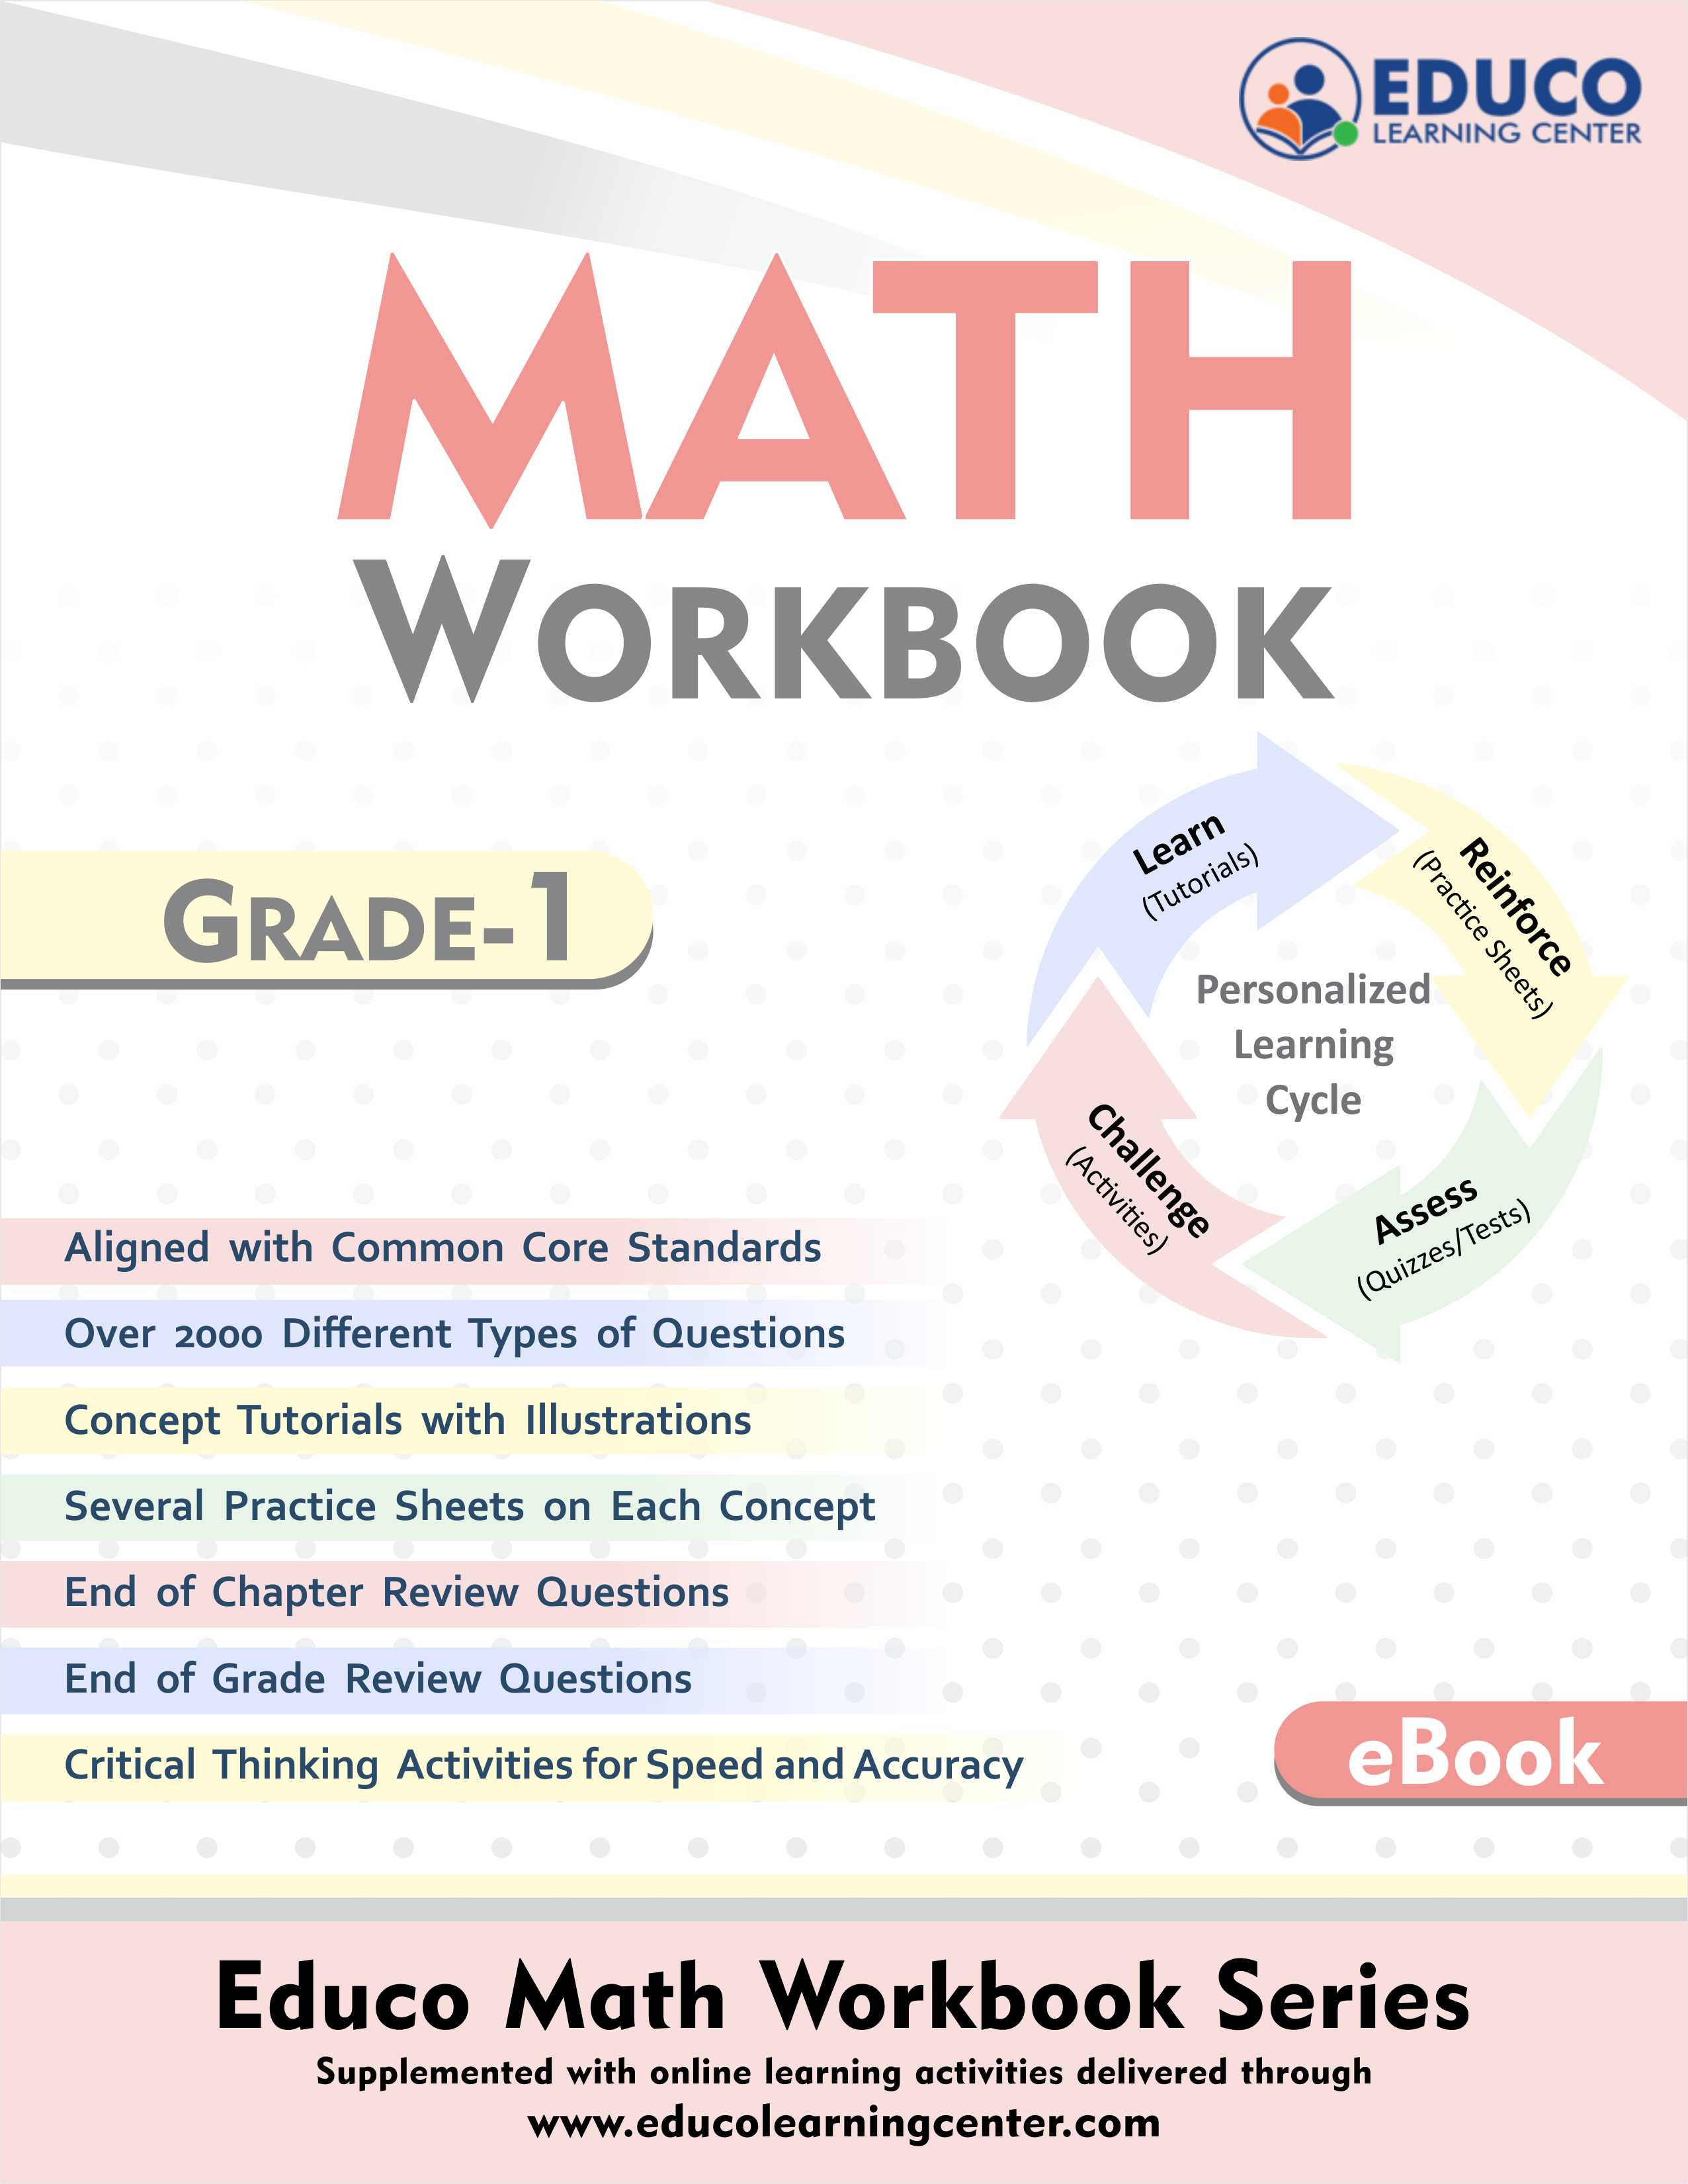 Grade 1 Math Printable Workbook including over 2000 Different types of Math Questions